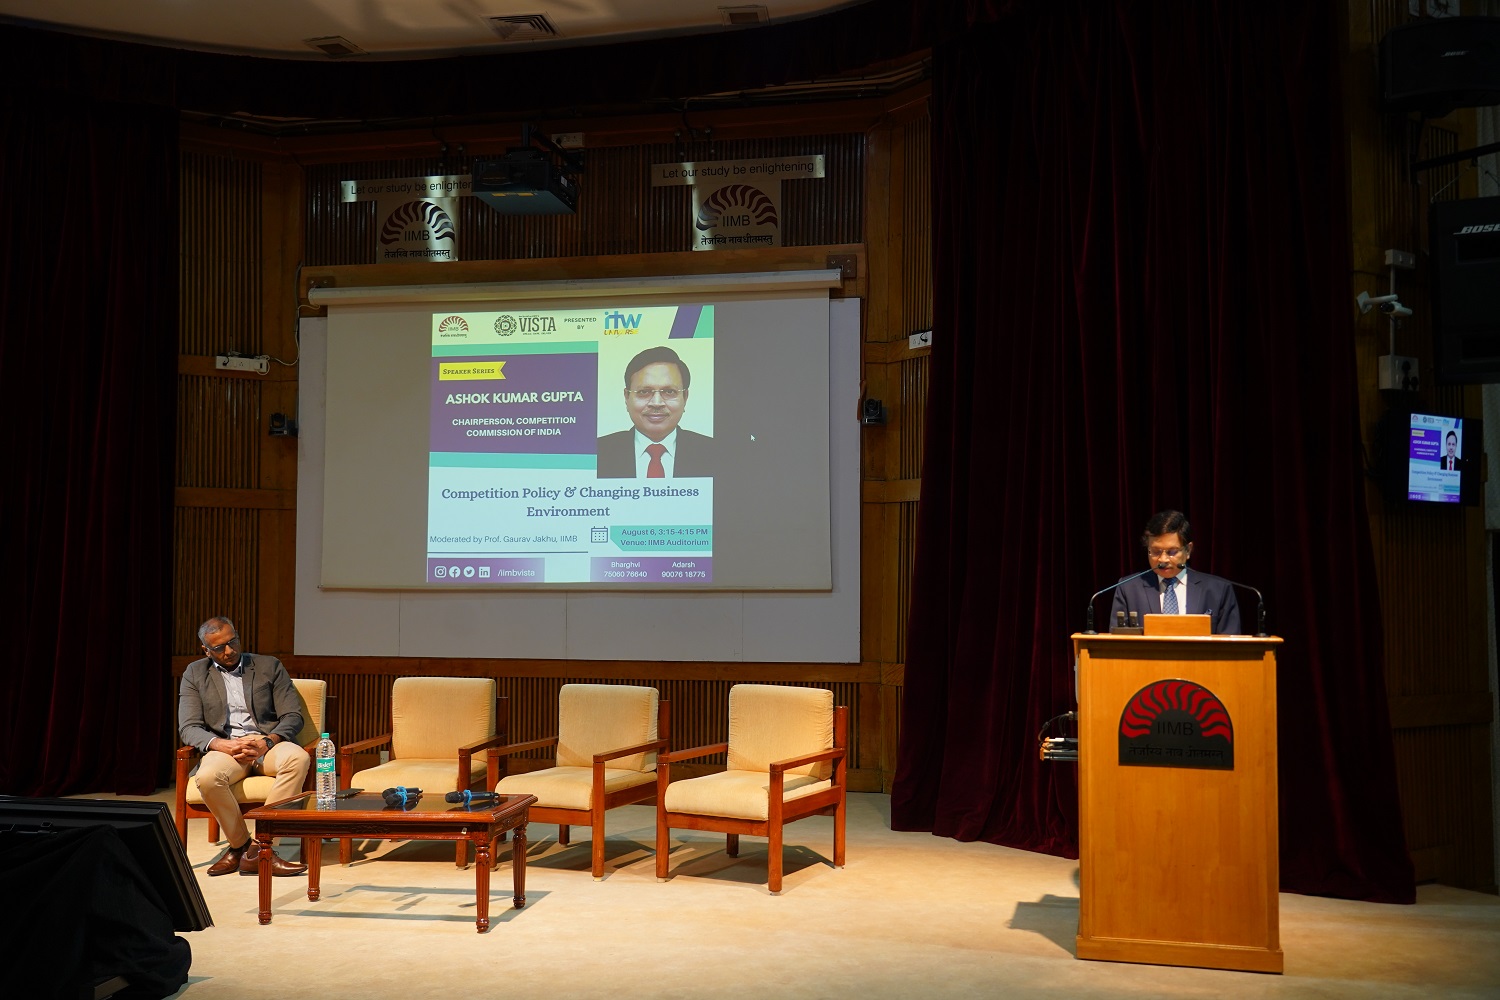 In conversation with Dr. Gaurav Jakhu, faculty from the Economics & Social Sciences area at IIMB, during Vista 2022, Ashok Kumar Gupta, Chairperson, Competition Commission of India (CCI), shared his thoughts on the prevailing competition policy and its implications in the changing business environment.